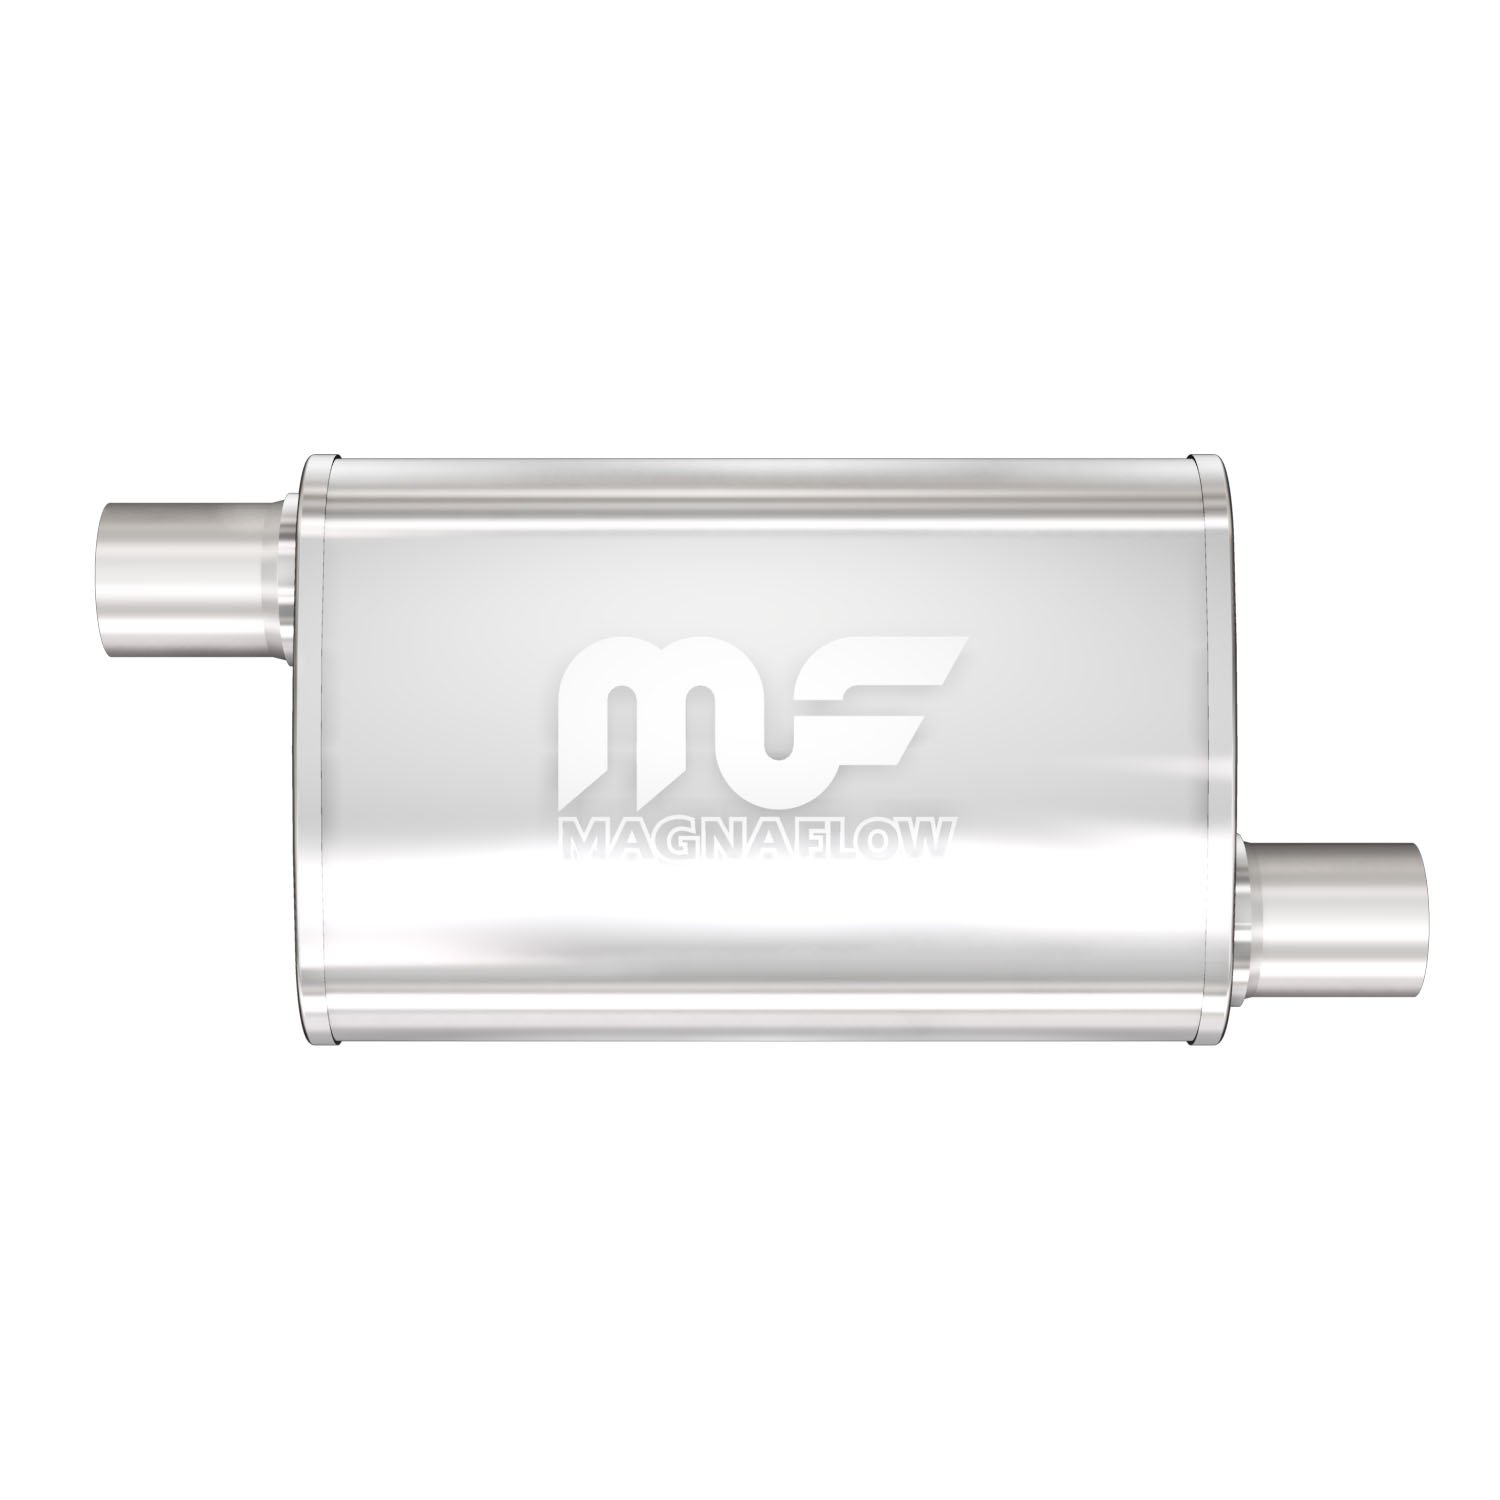 4" x 9" Oval Muffler Offset In/Offset Out: 2.25"/2.25" Body Length: 14" Overall Length: 20" Core Size: 2.5" Polished Finish